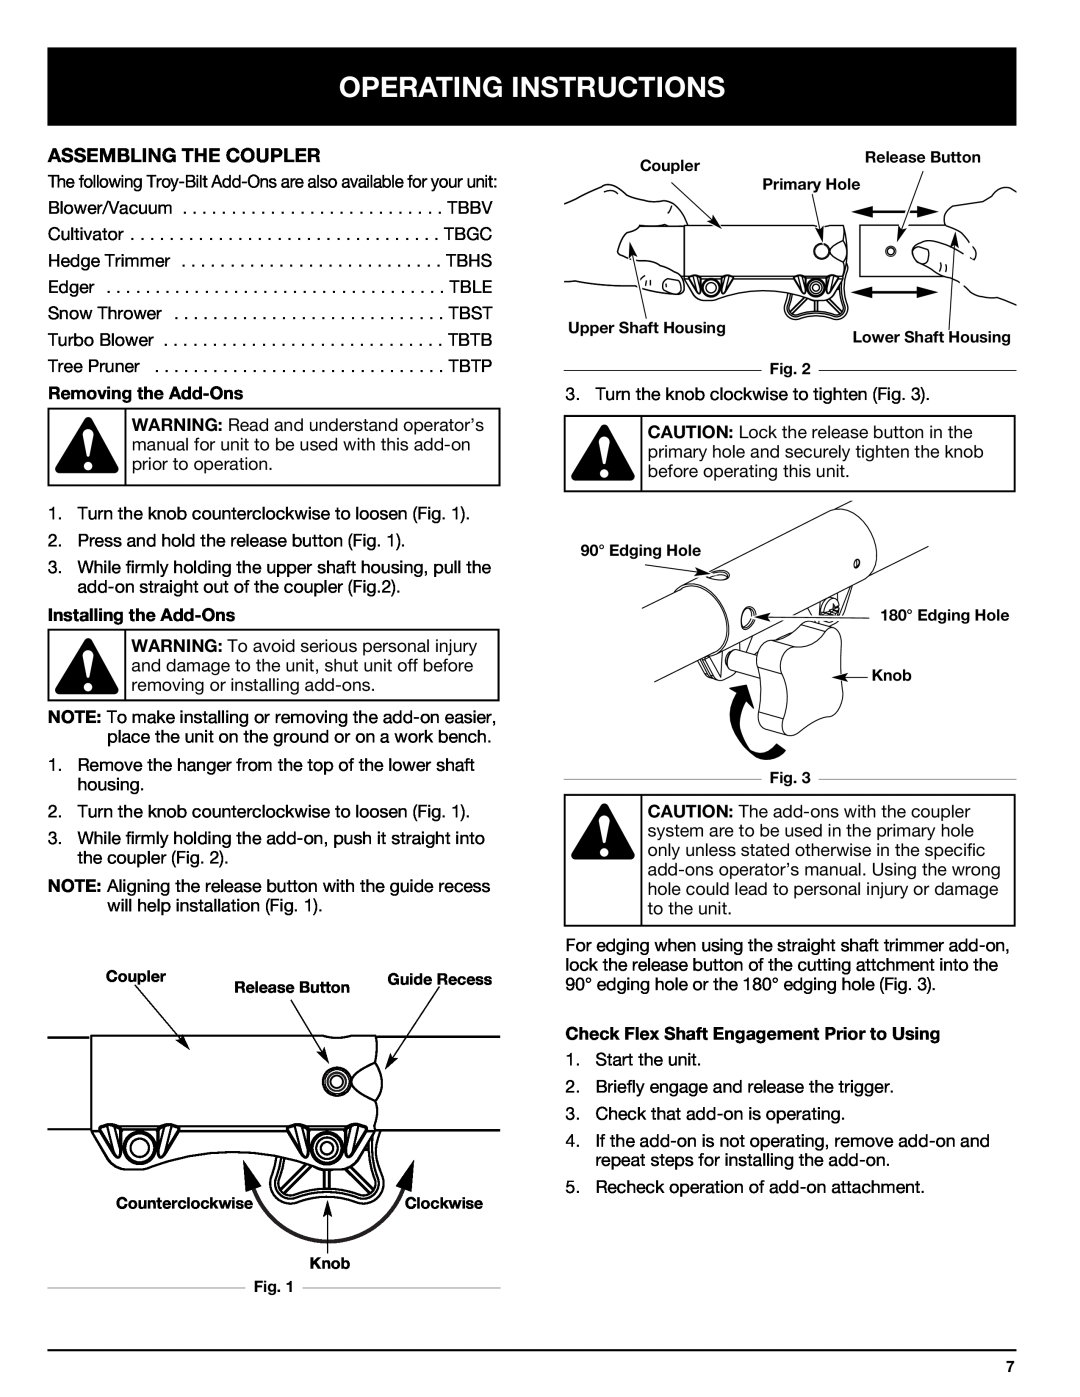 Troy-Bilt 769-00425A manual Operating Instructions, Assembling The Coupler, Removing the Add-Ons, Installing the Add-Ons 